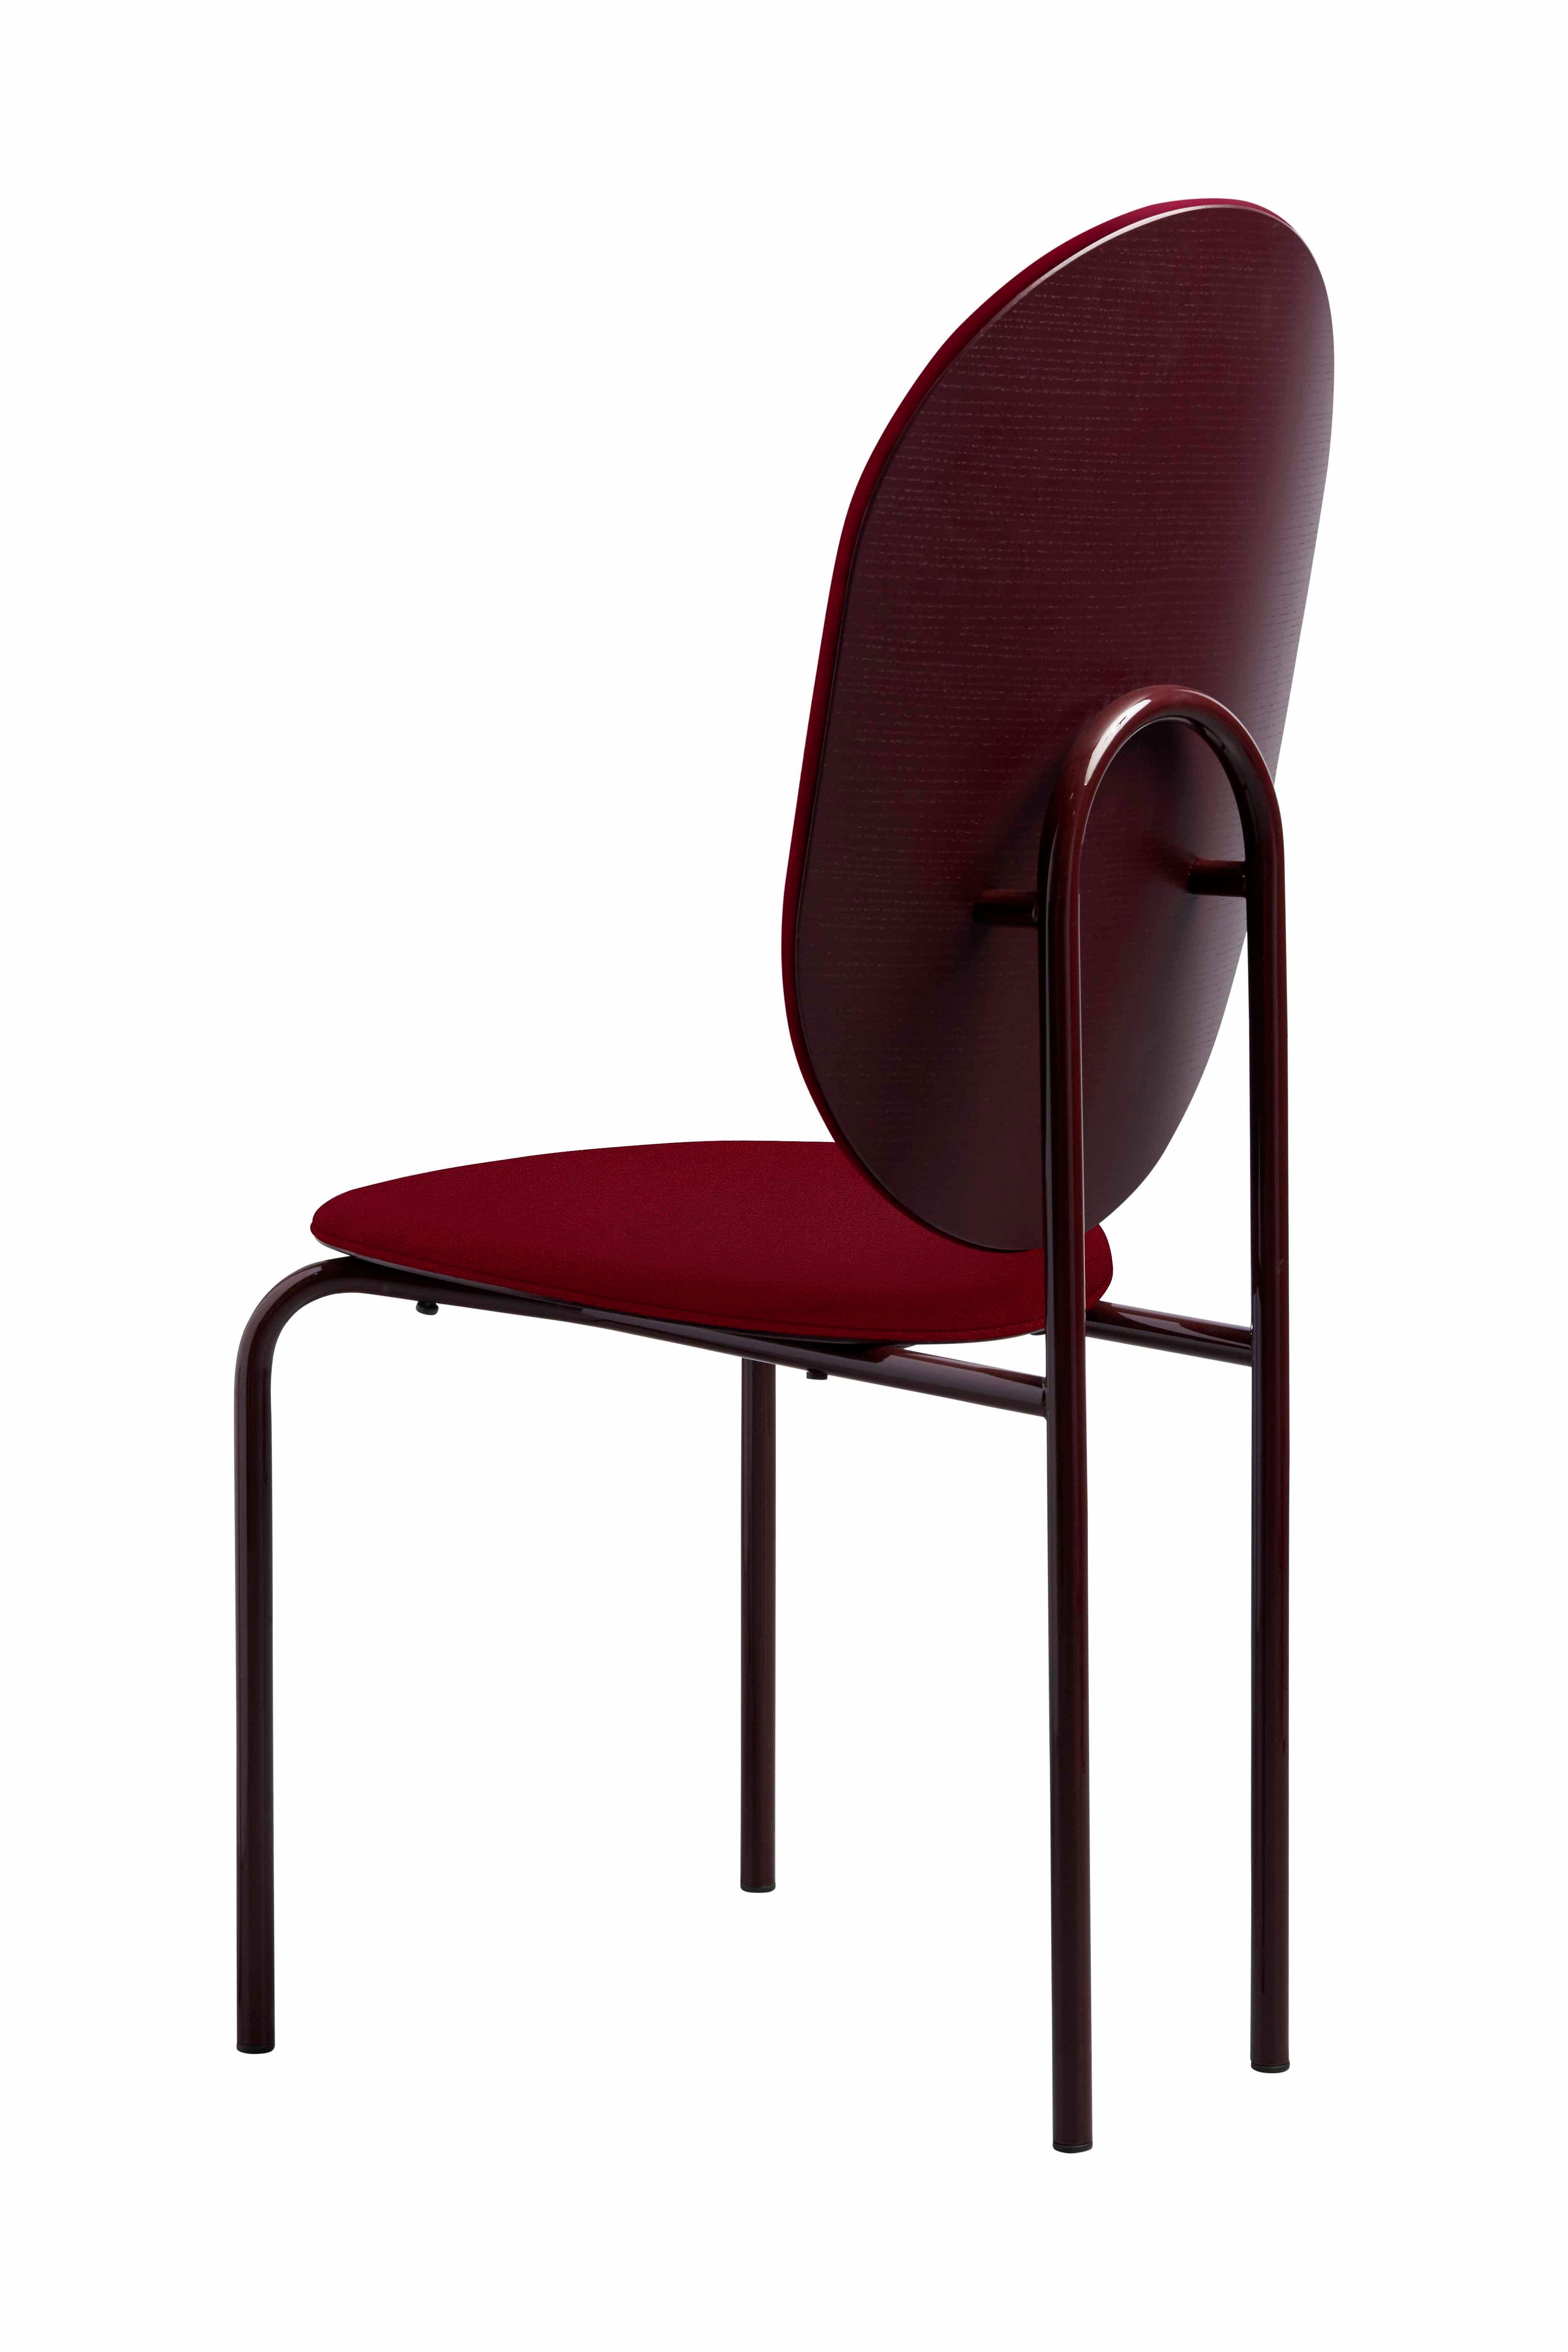 Michelle high back dining chair upholstered in sand velvet / black frame / natural ash shell

With a subtle nod to the 1970s and 1980s the Michelle chair makes a bold style statement with an oval shaped back mounted upon an arch shaped tubular steel